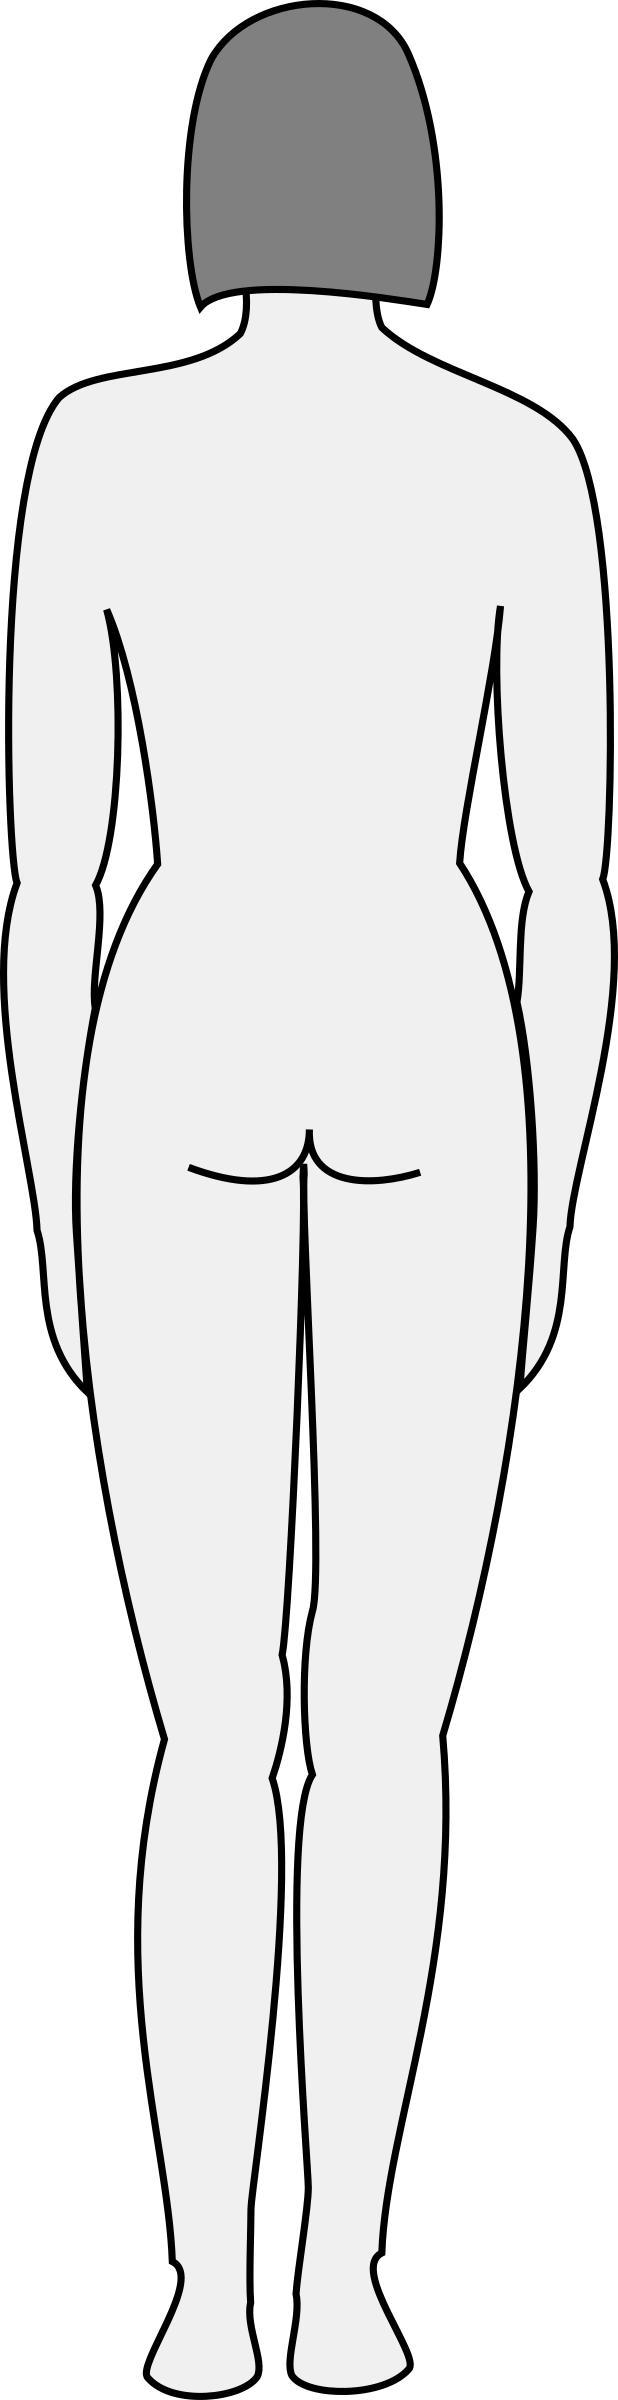 Female body silhouette - back png transparent